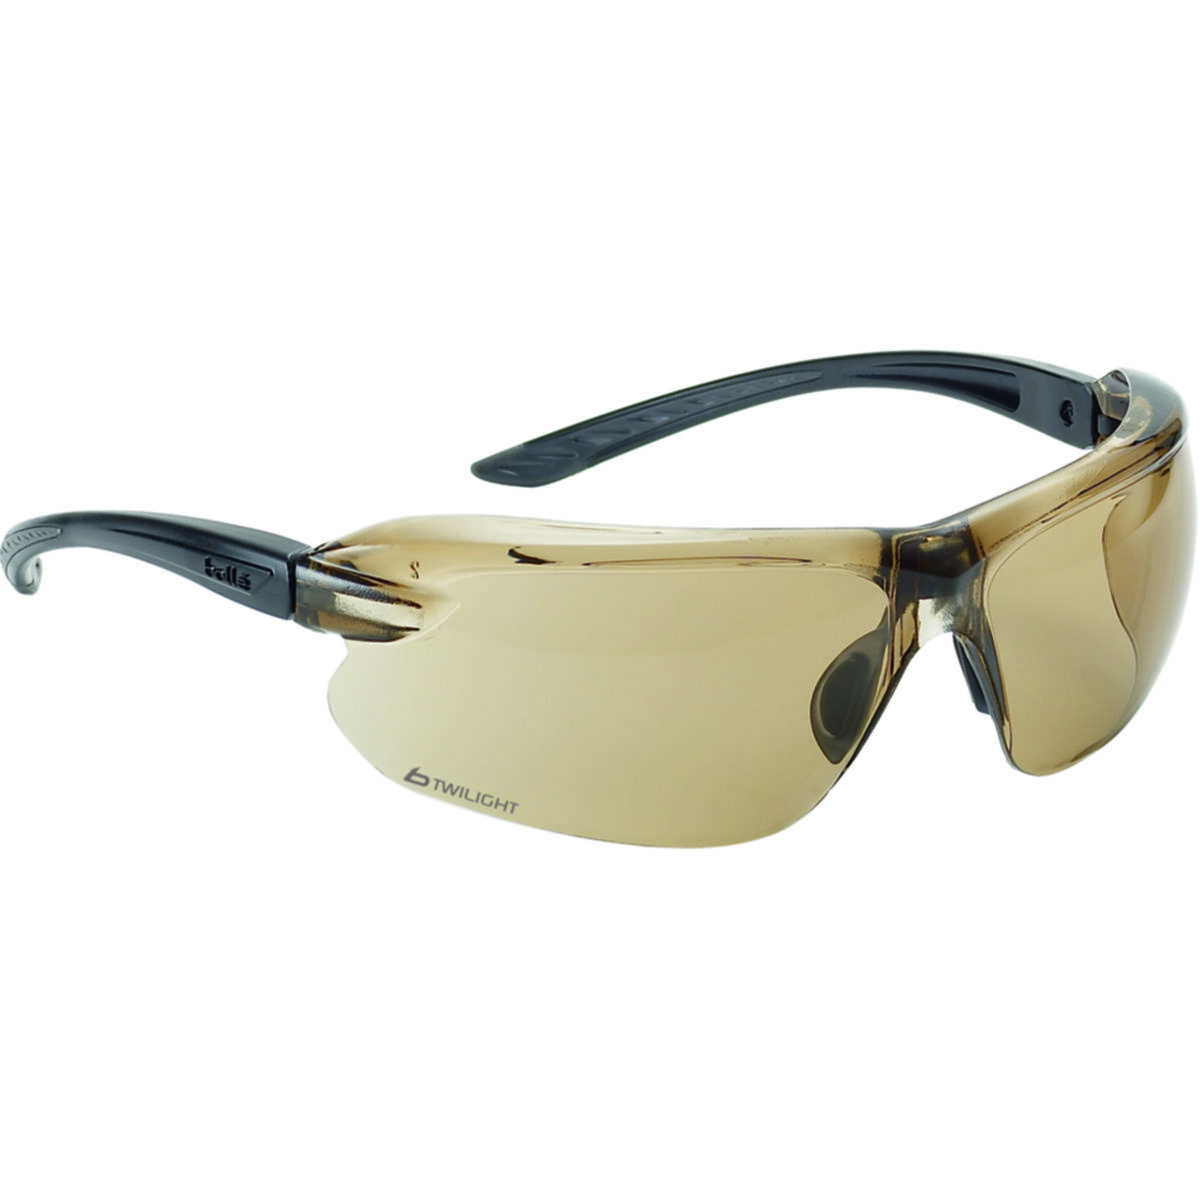 Bollé Bolle Universal Smoke Safety Glasses for sale online 